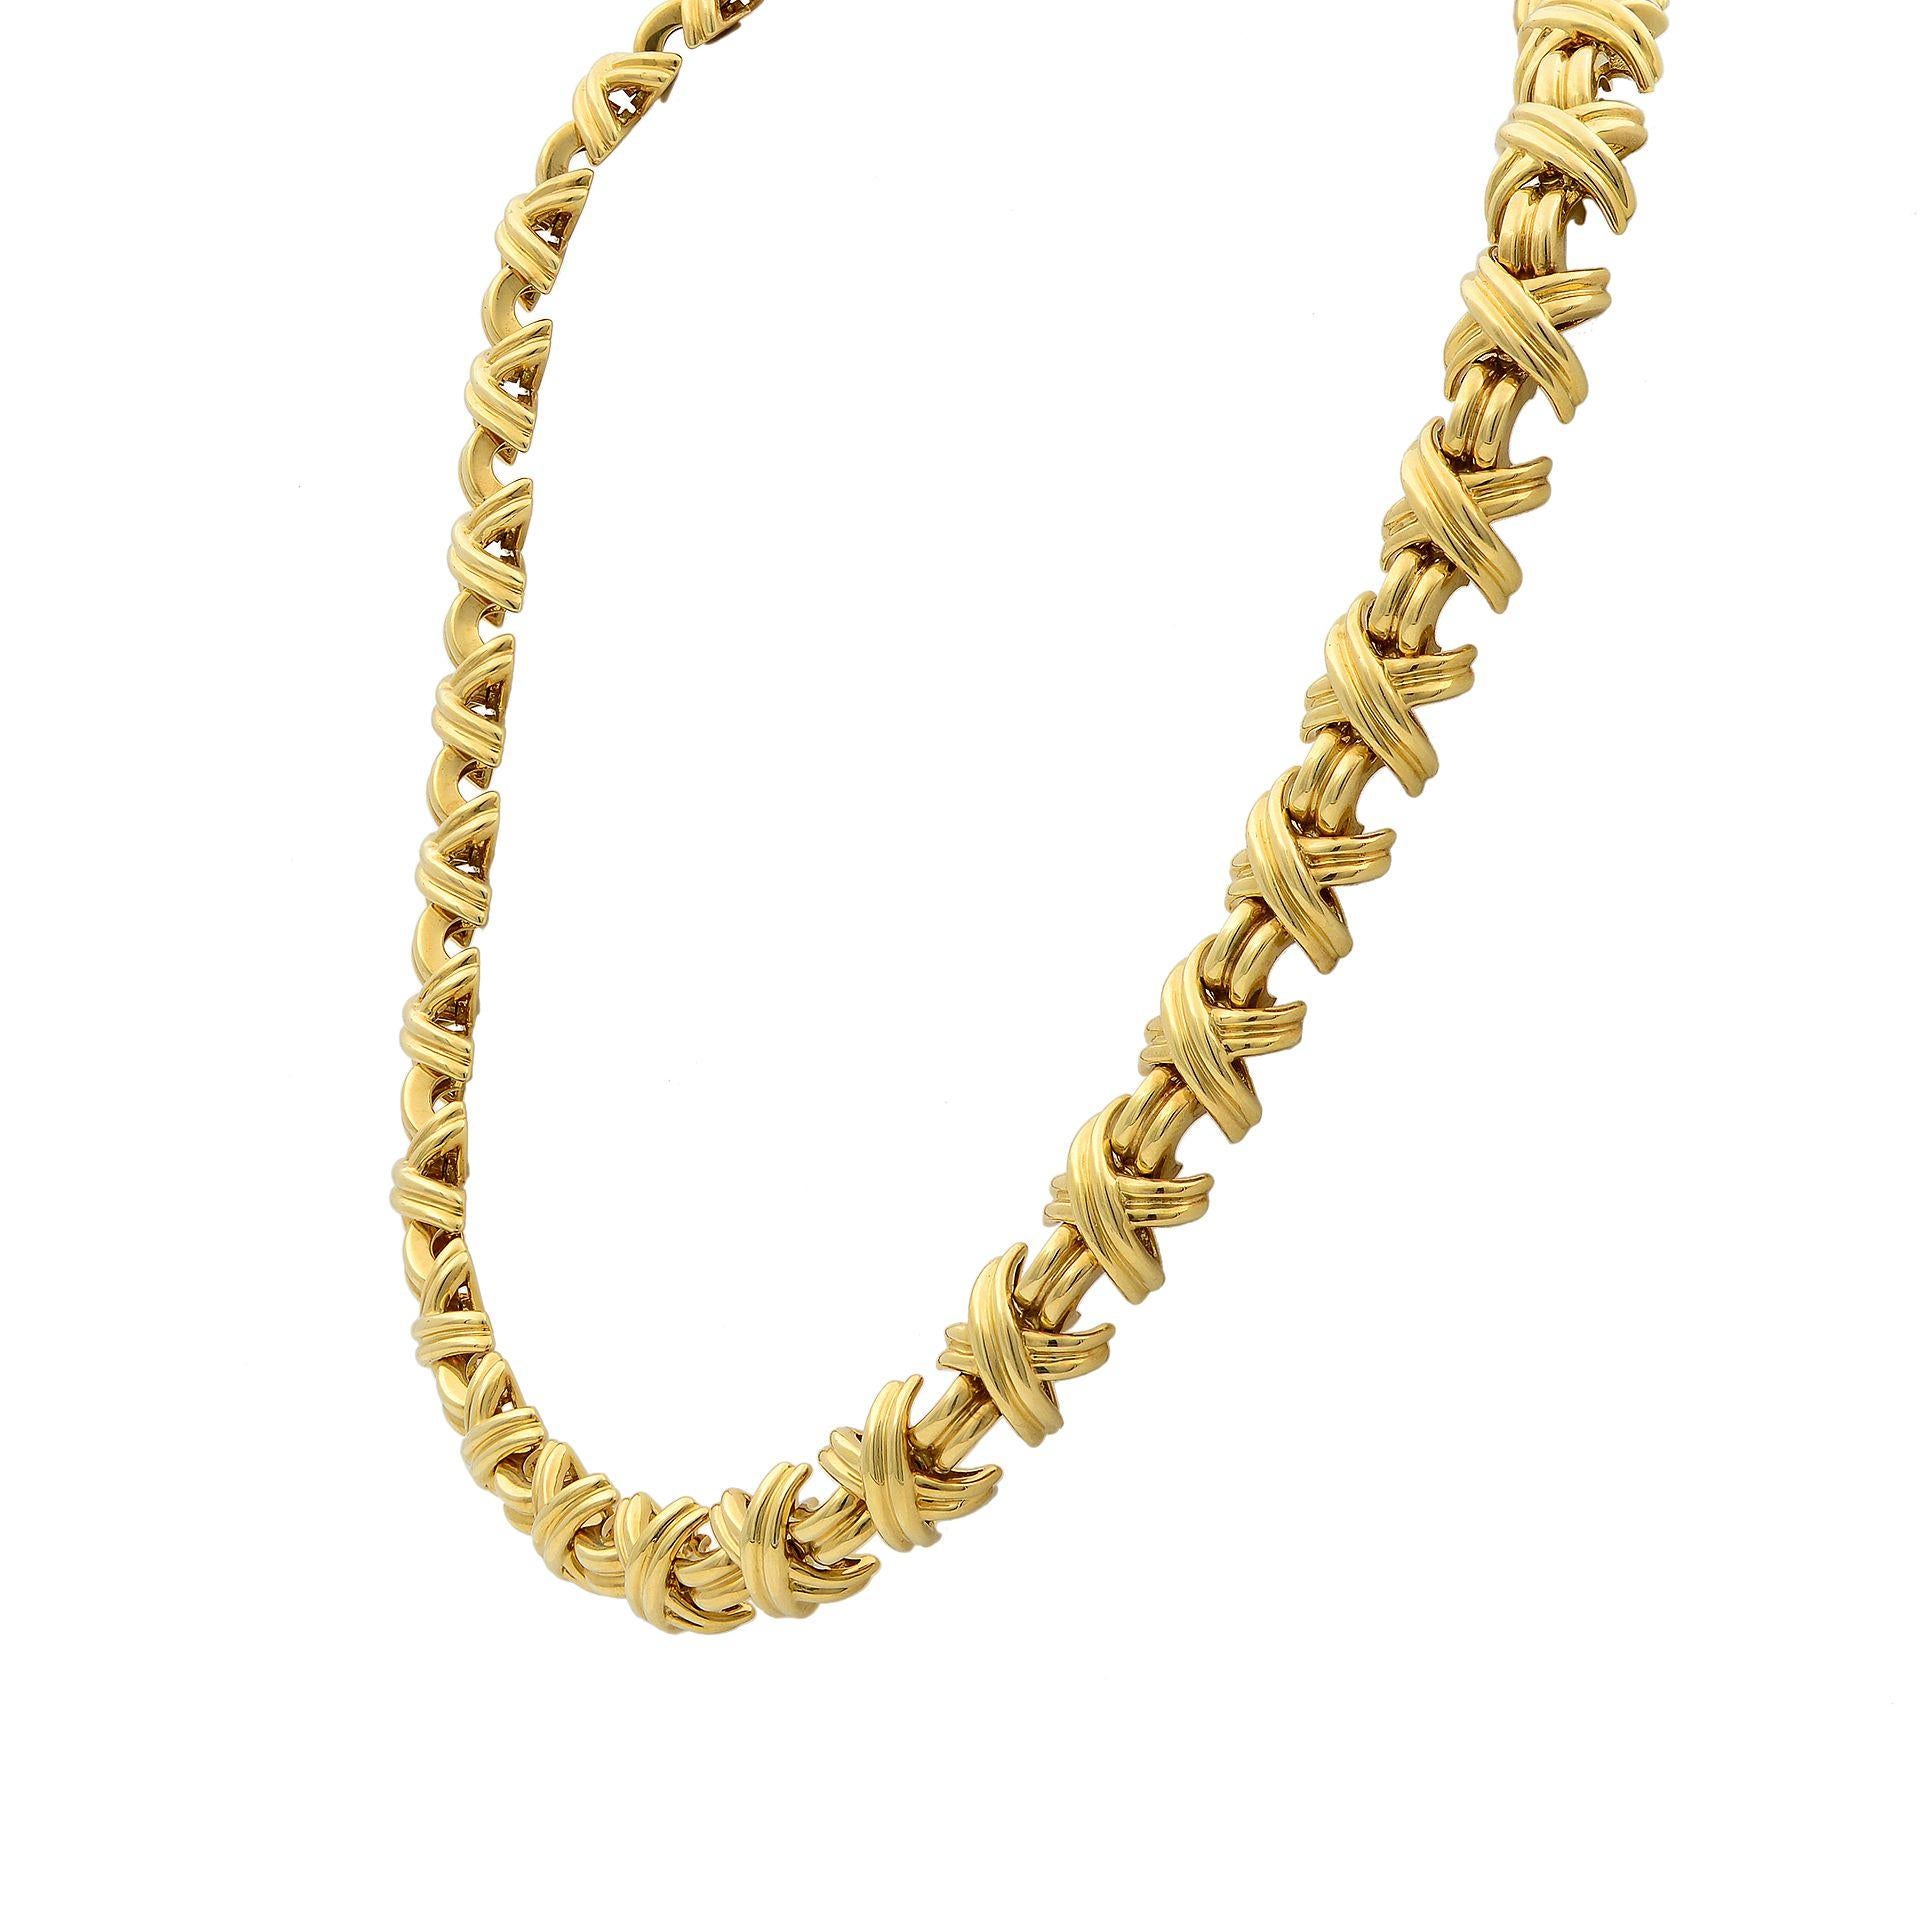 This gorgeous Vintage estate necklace is a signed piece by Tiffany & Co. Its made of vibrant 18k yellow gold, the necklace is part of the iconic Signature 